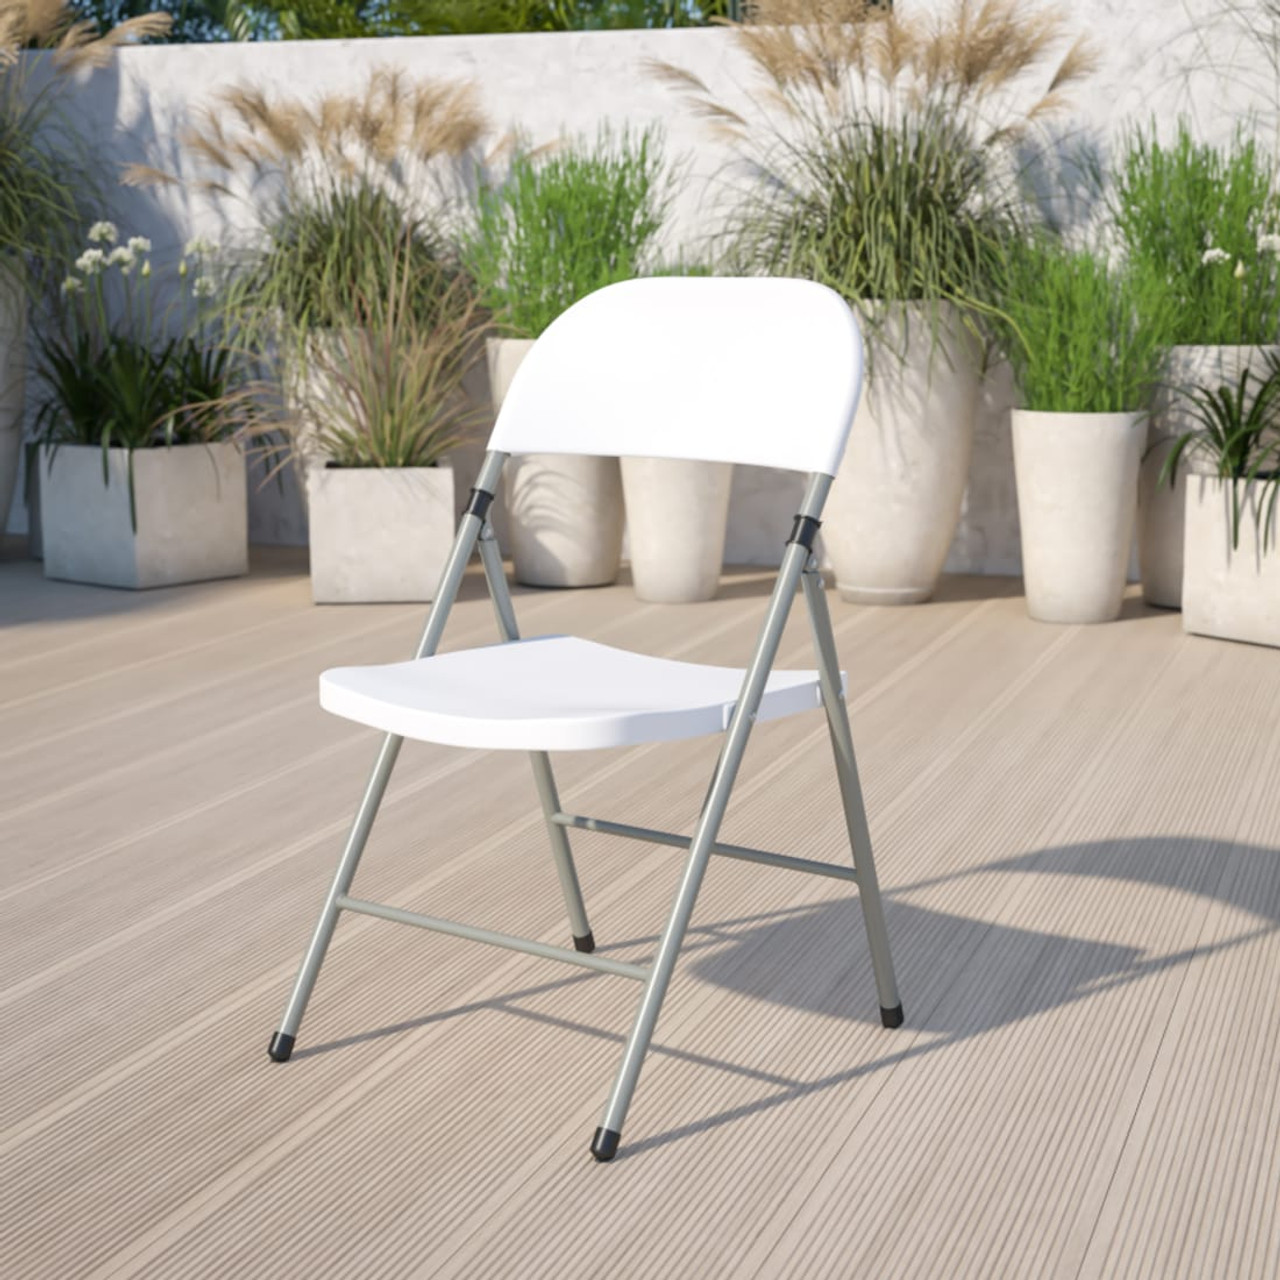 HERCULES White Plastic Folding Chair with Gray Frame